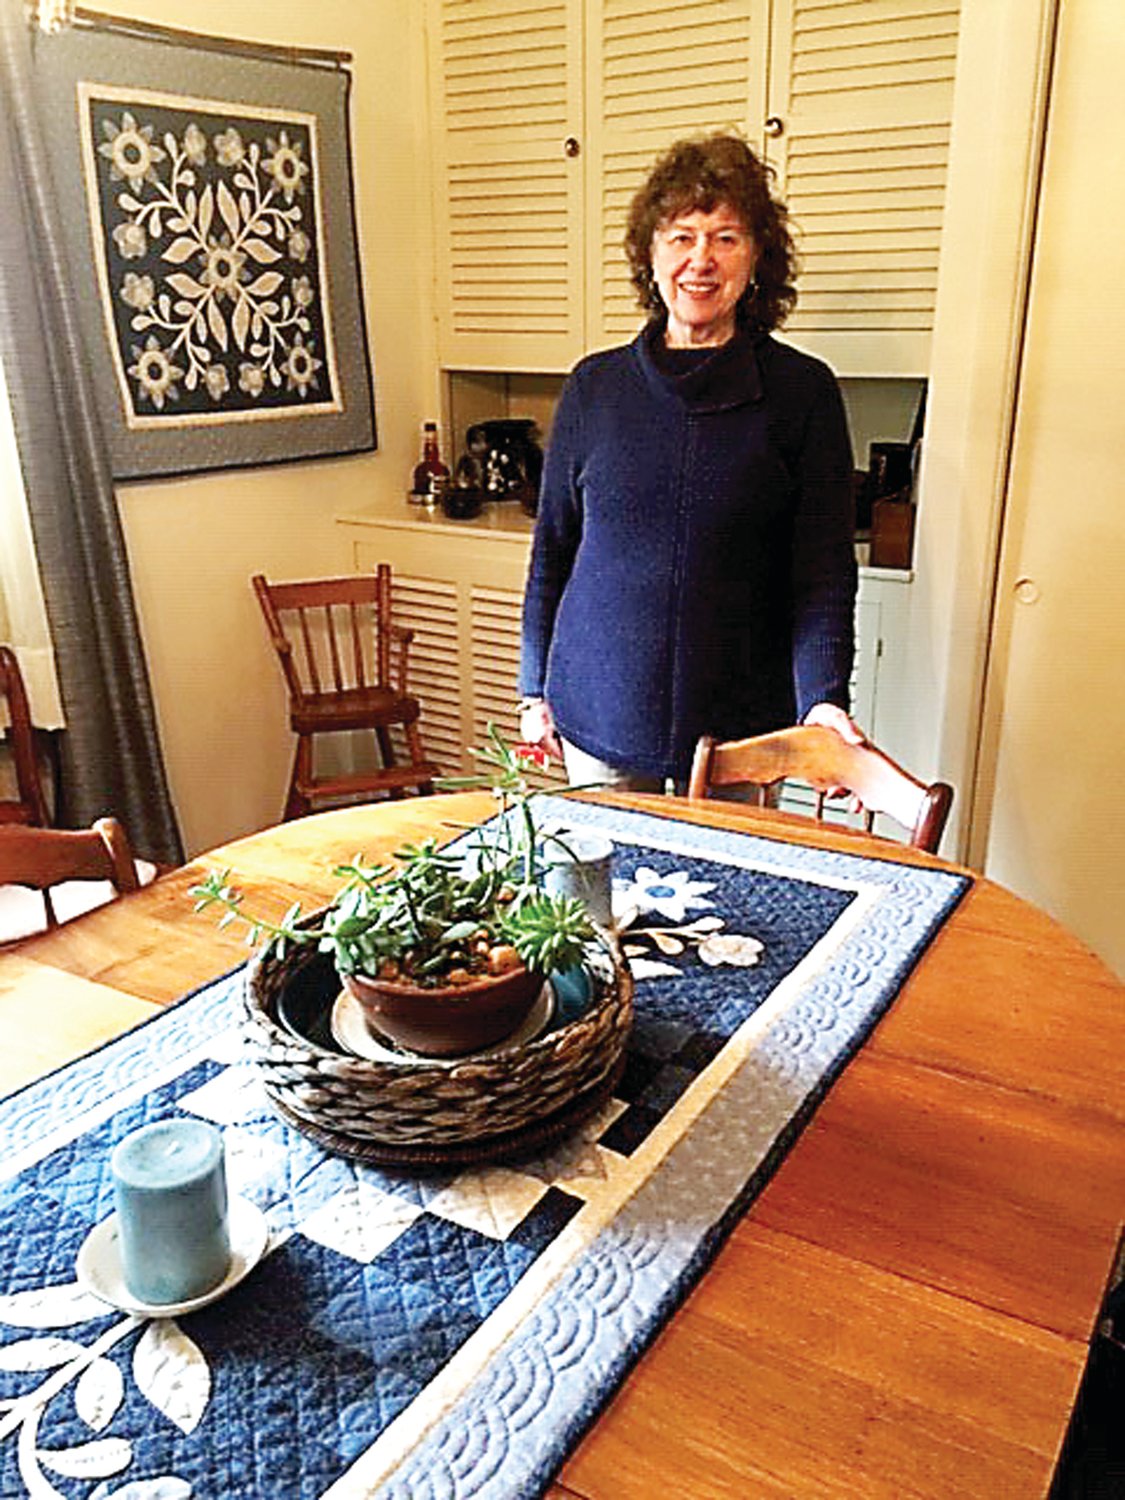 Janet Stoner with a quilted runner and a matching wall hanging in her Lahaska home. Photograph by Kathryn Finegan Clark.